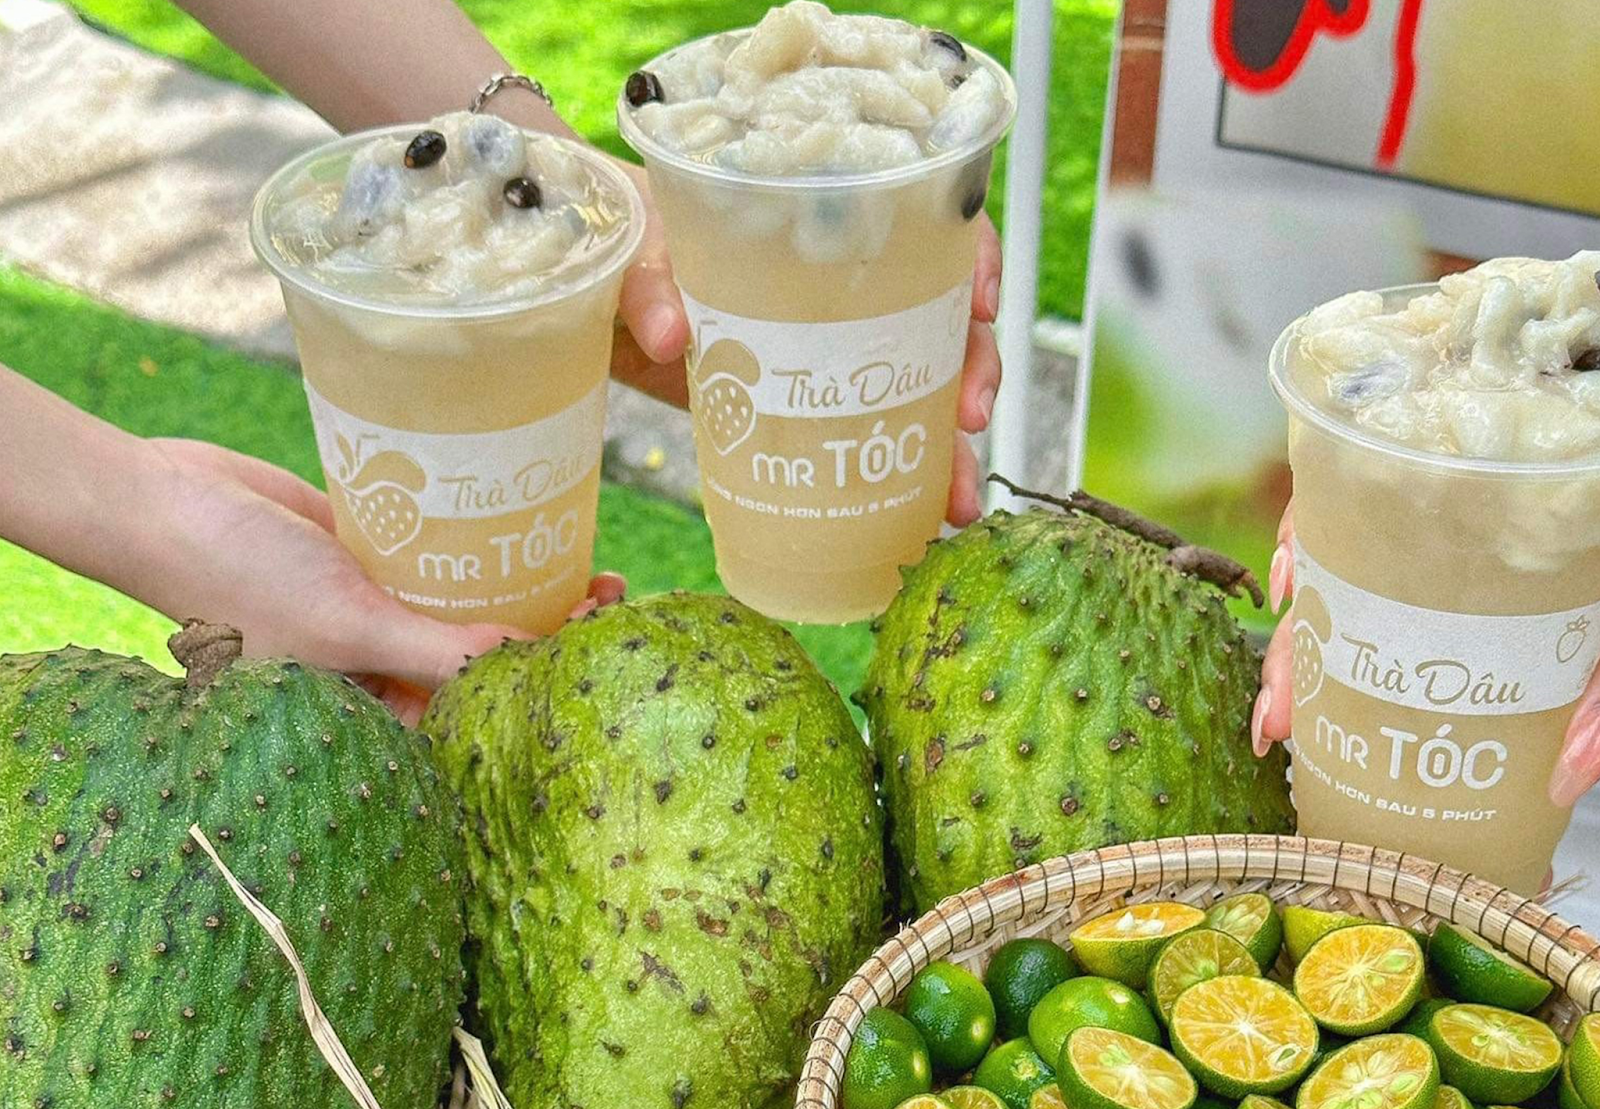 Soursop-Fruit-Tea-is-one-of-the-hottest-beverage